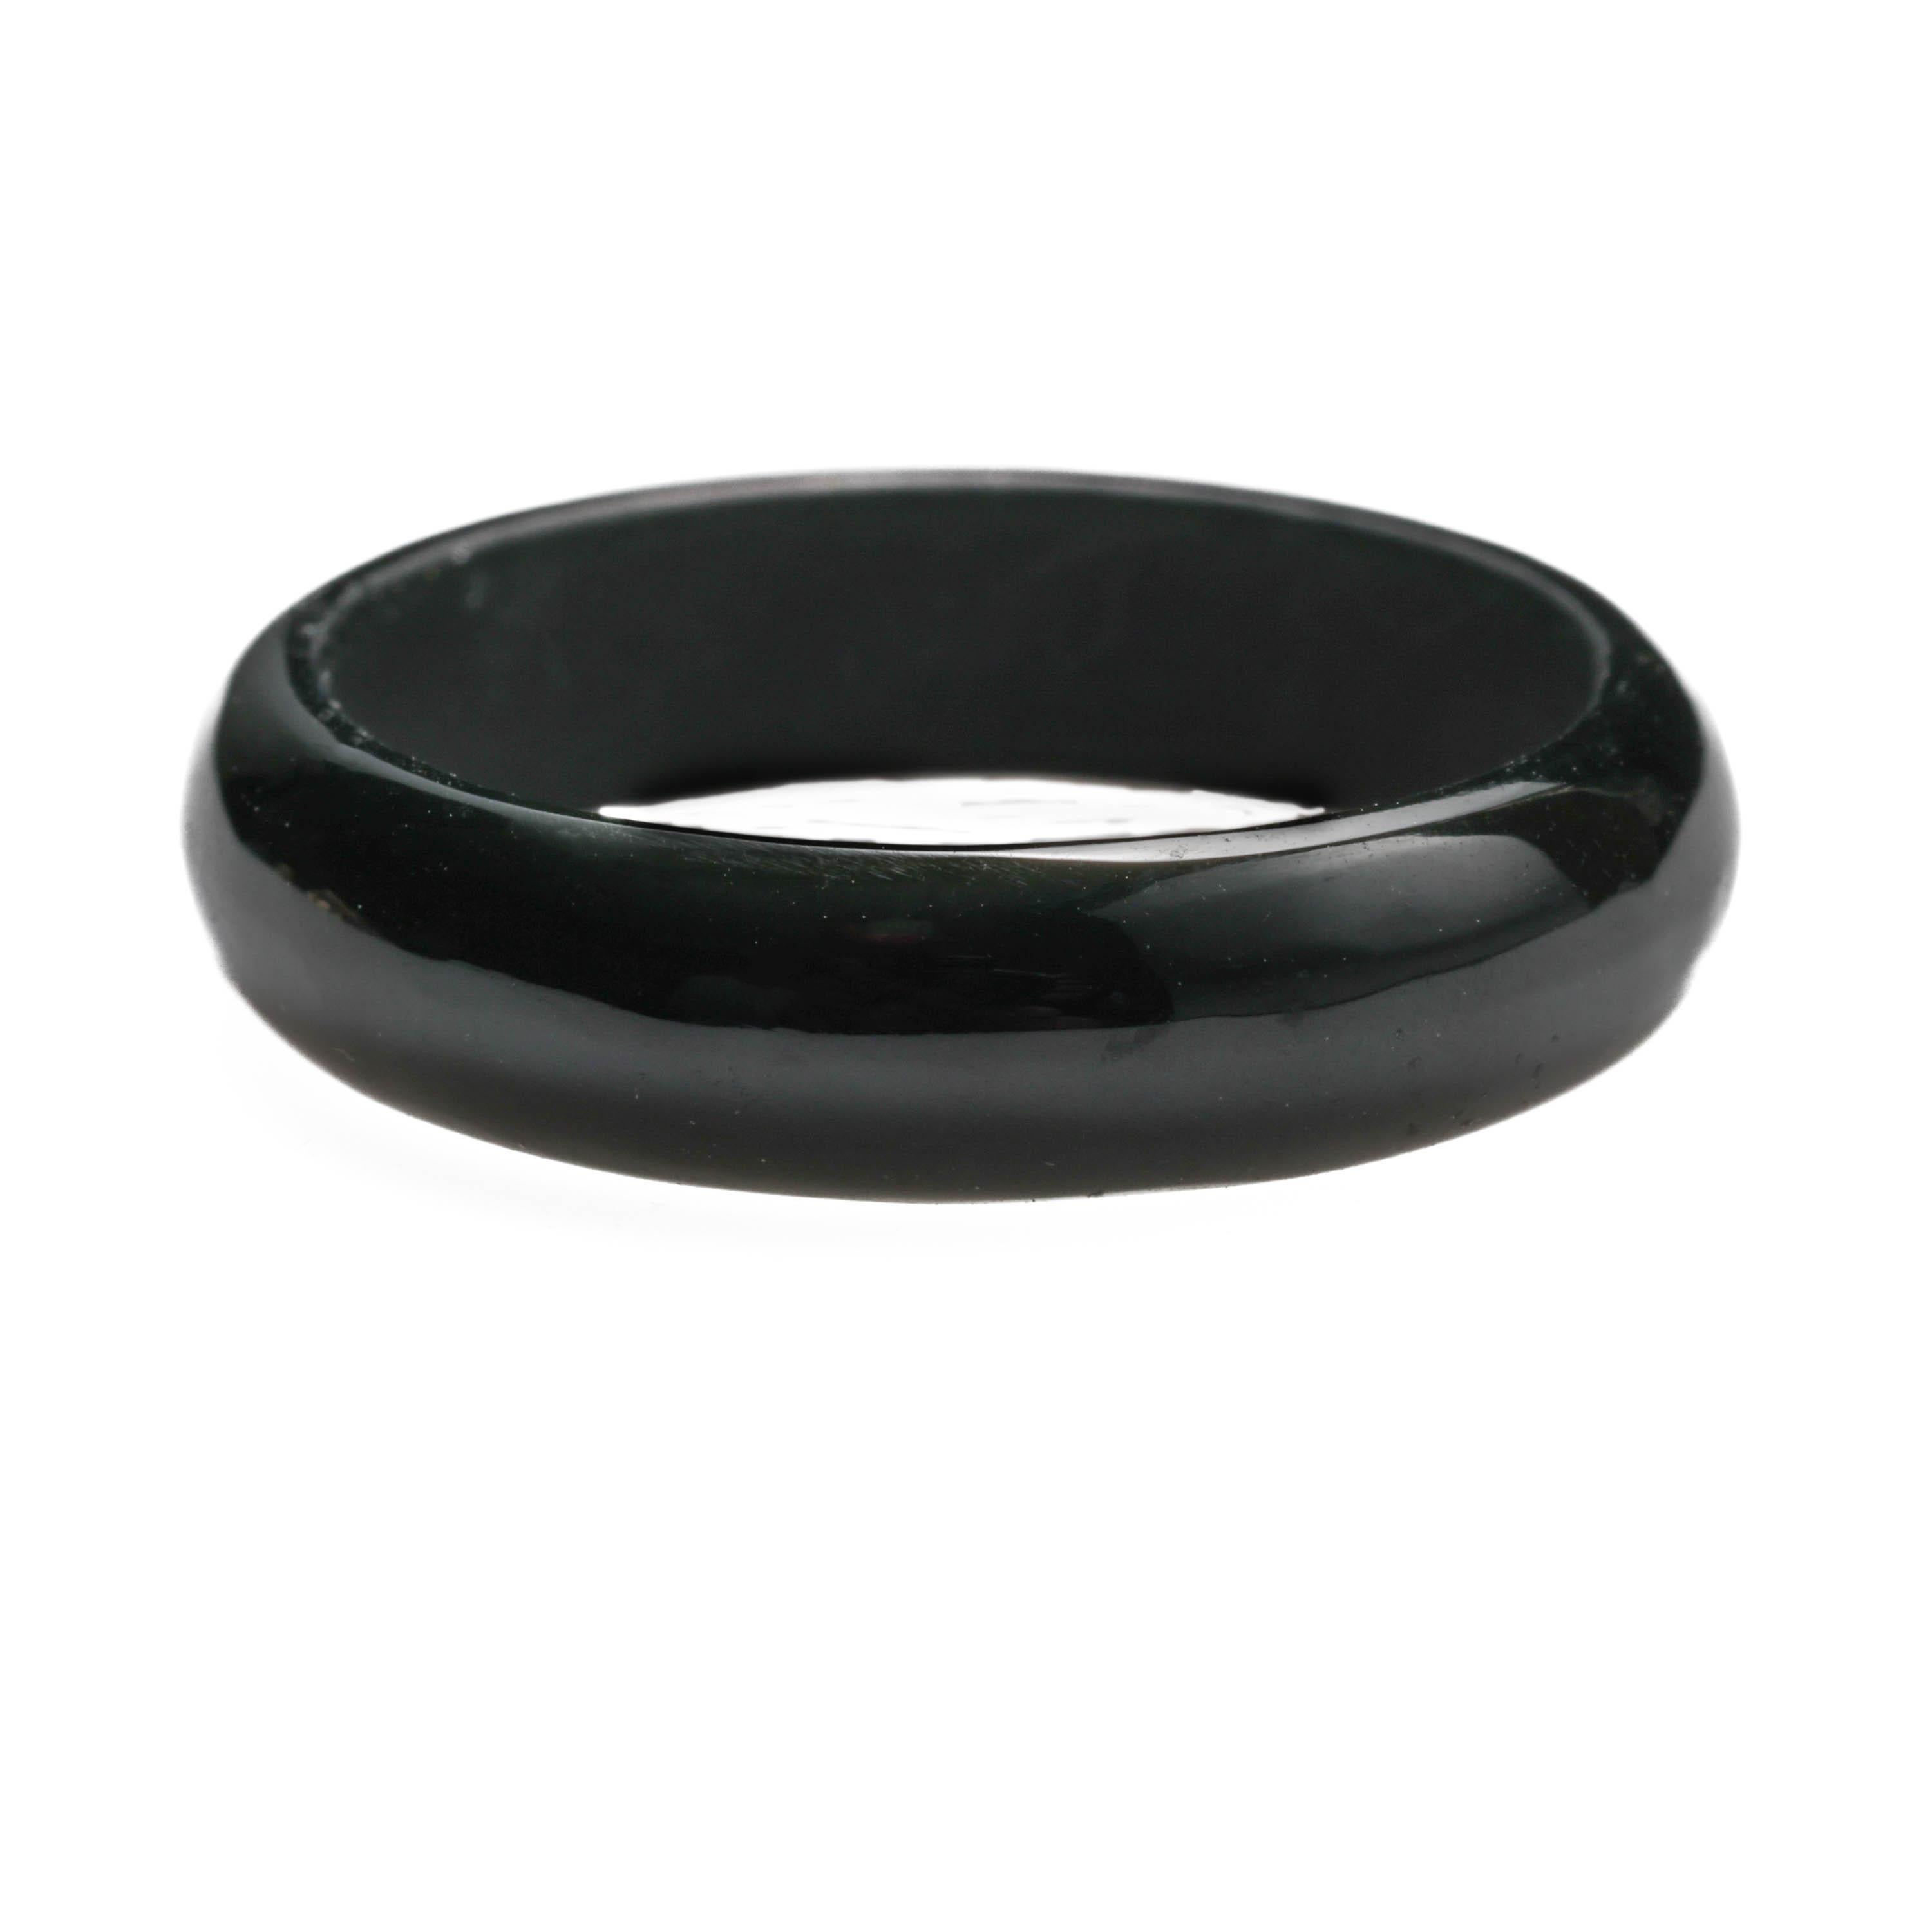 This ring was carved from a single piece of certified natural and untreated black nephrite jade. The gleaming grand piano polish creates a circle white light all the way around the band. Dirty little secret: the vast majority of black jade has been